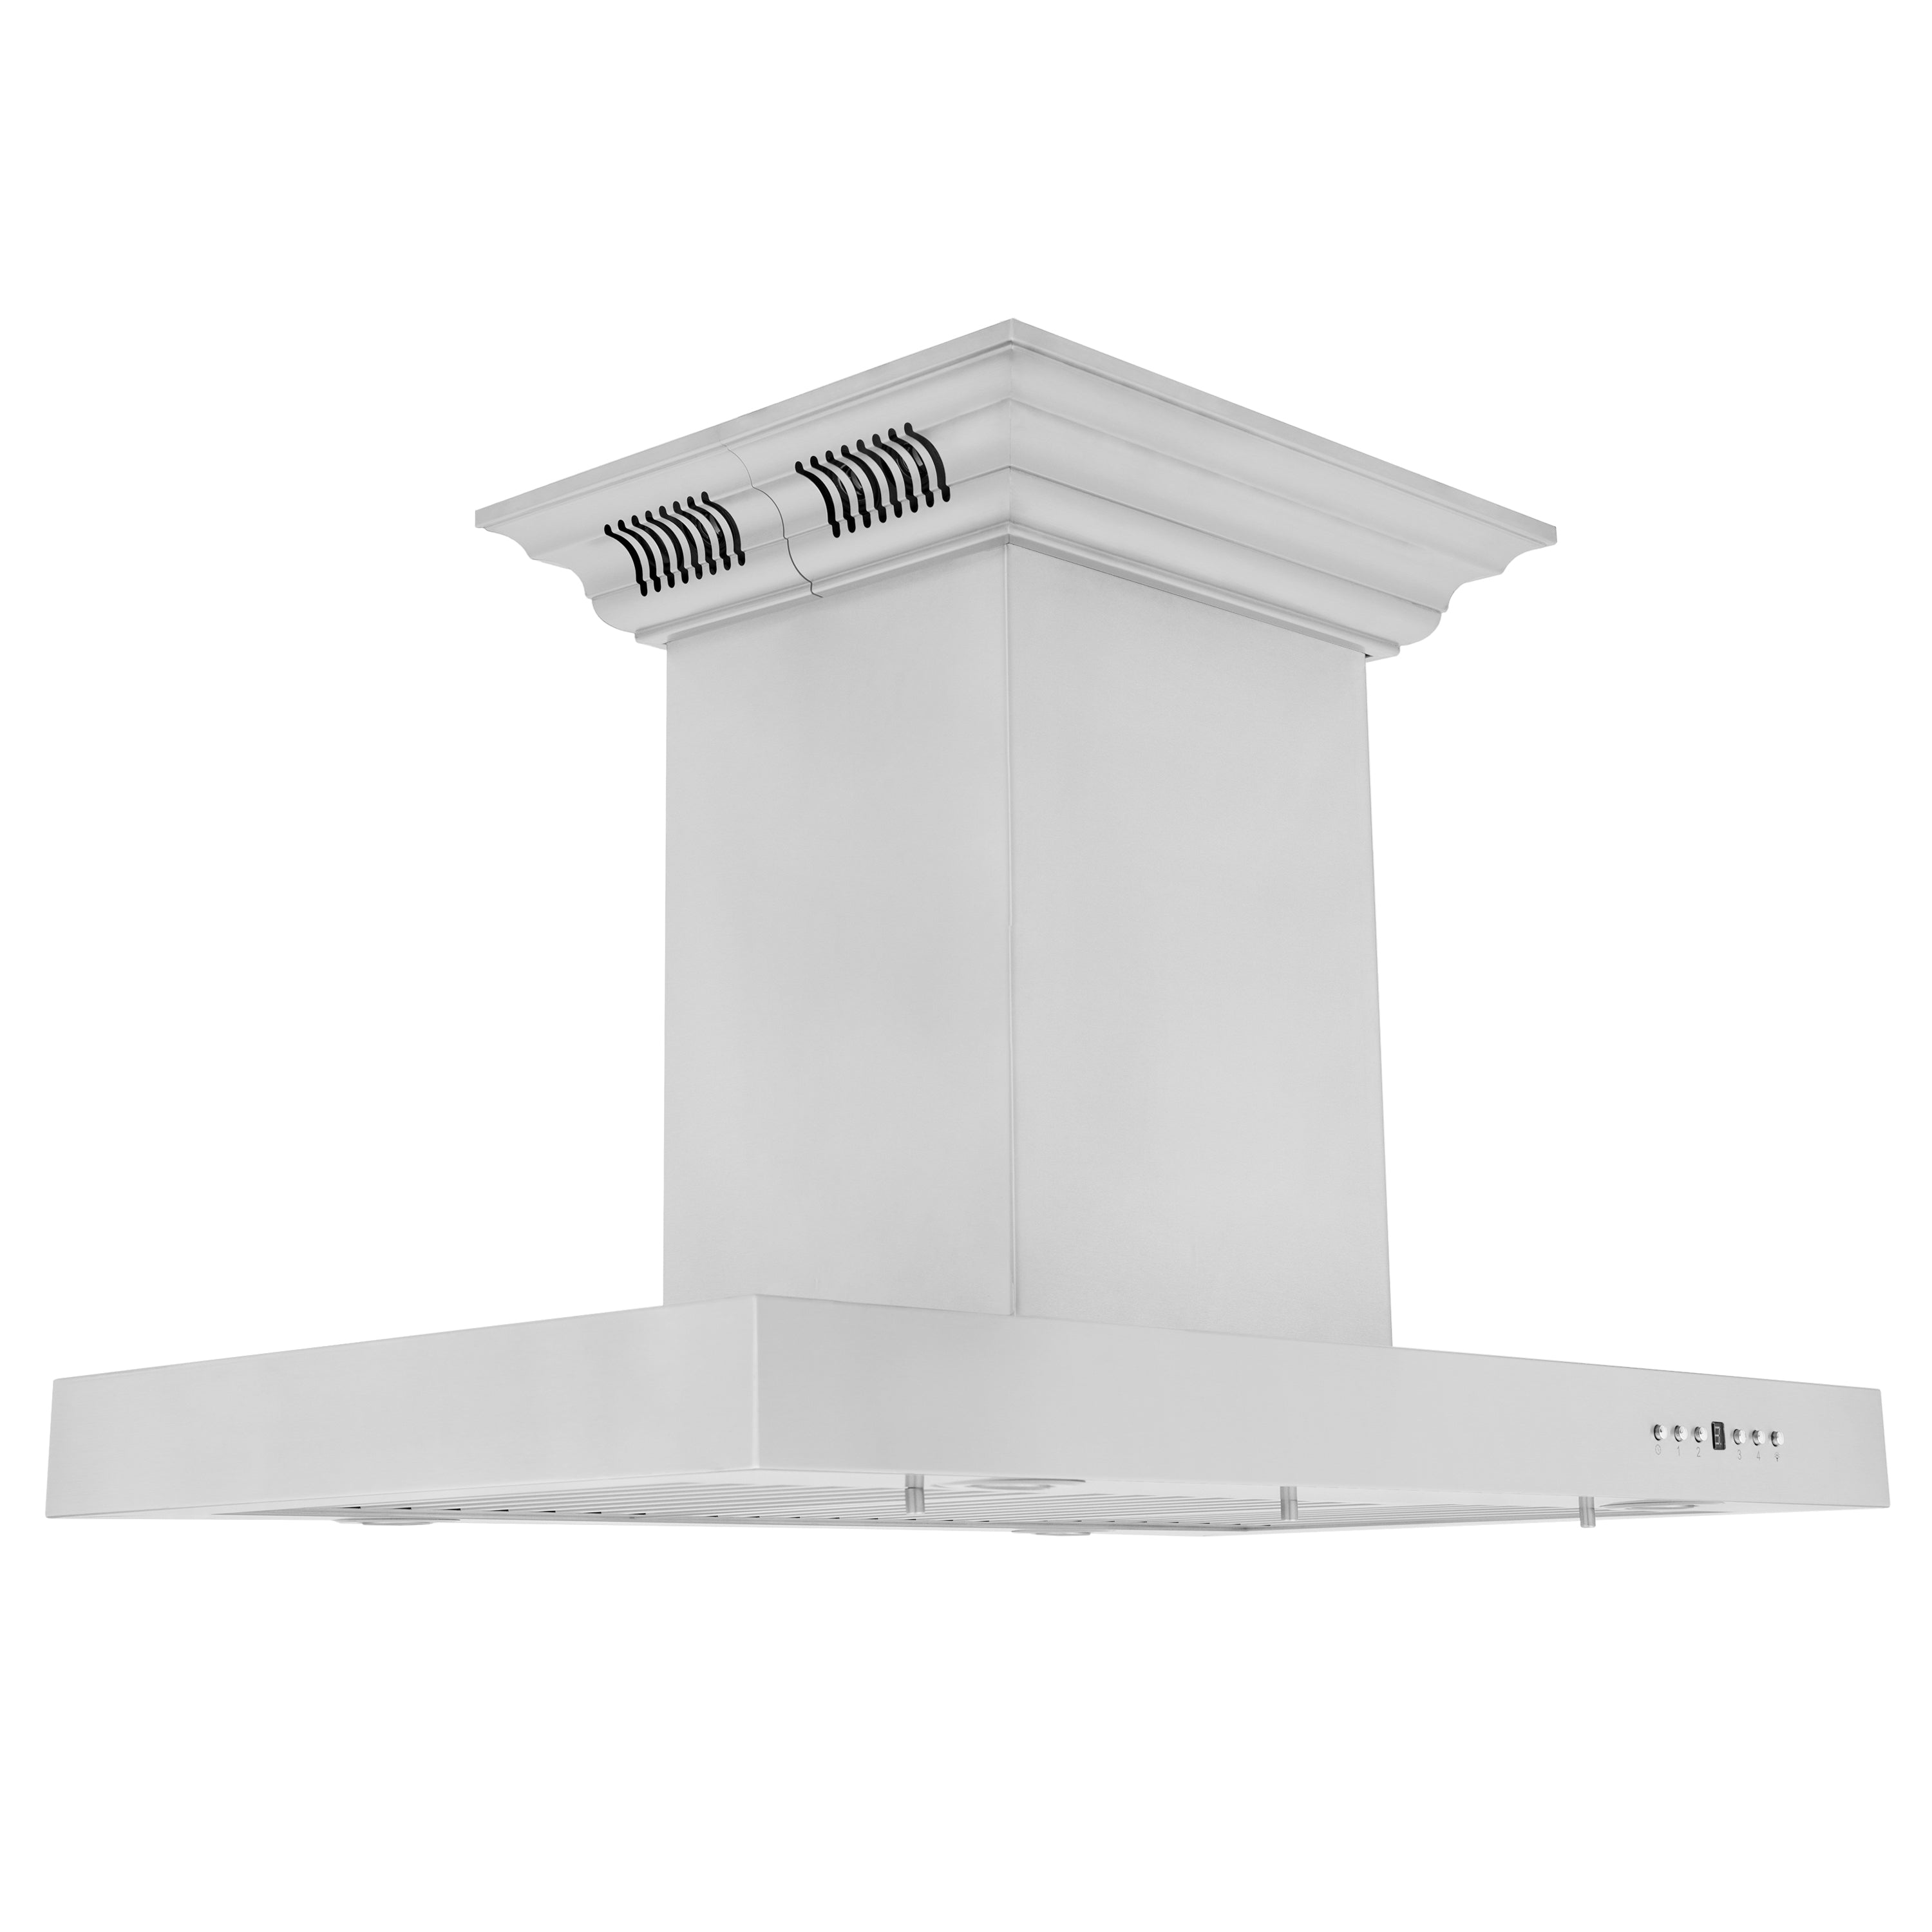 30" ZLINE CrownSound® Ducted Vent Island Mount Range Hood in Stainless Steel with Built-in Bluetooth Speakers (KE2iCRN-BT-30)